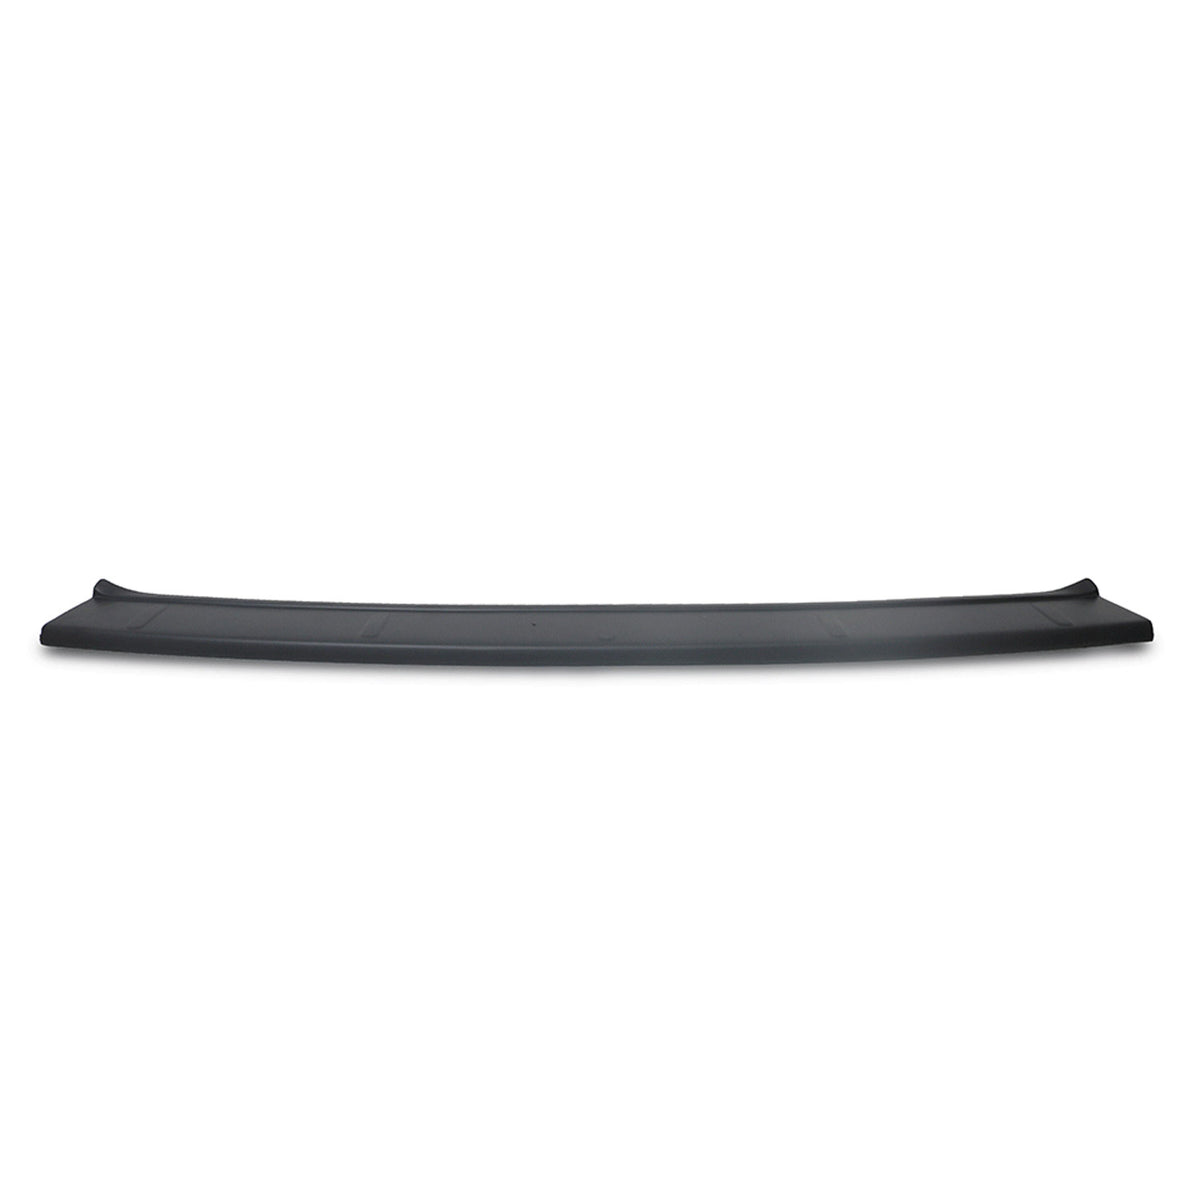 Loading sill protection for VW T6 Multivan 2015-2023 Matt Black ABS bumper protection